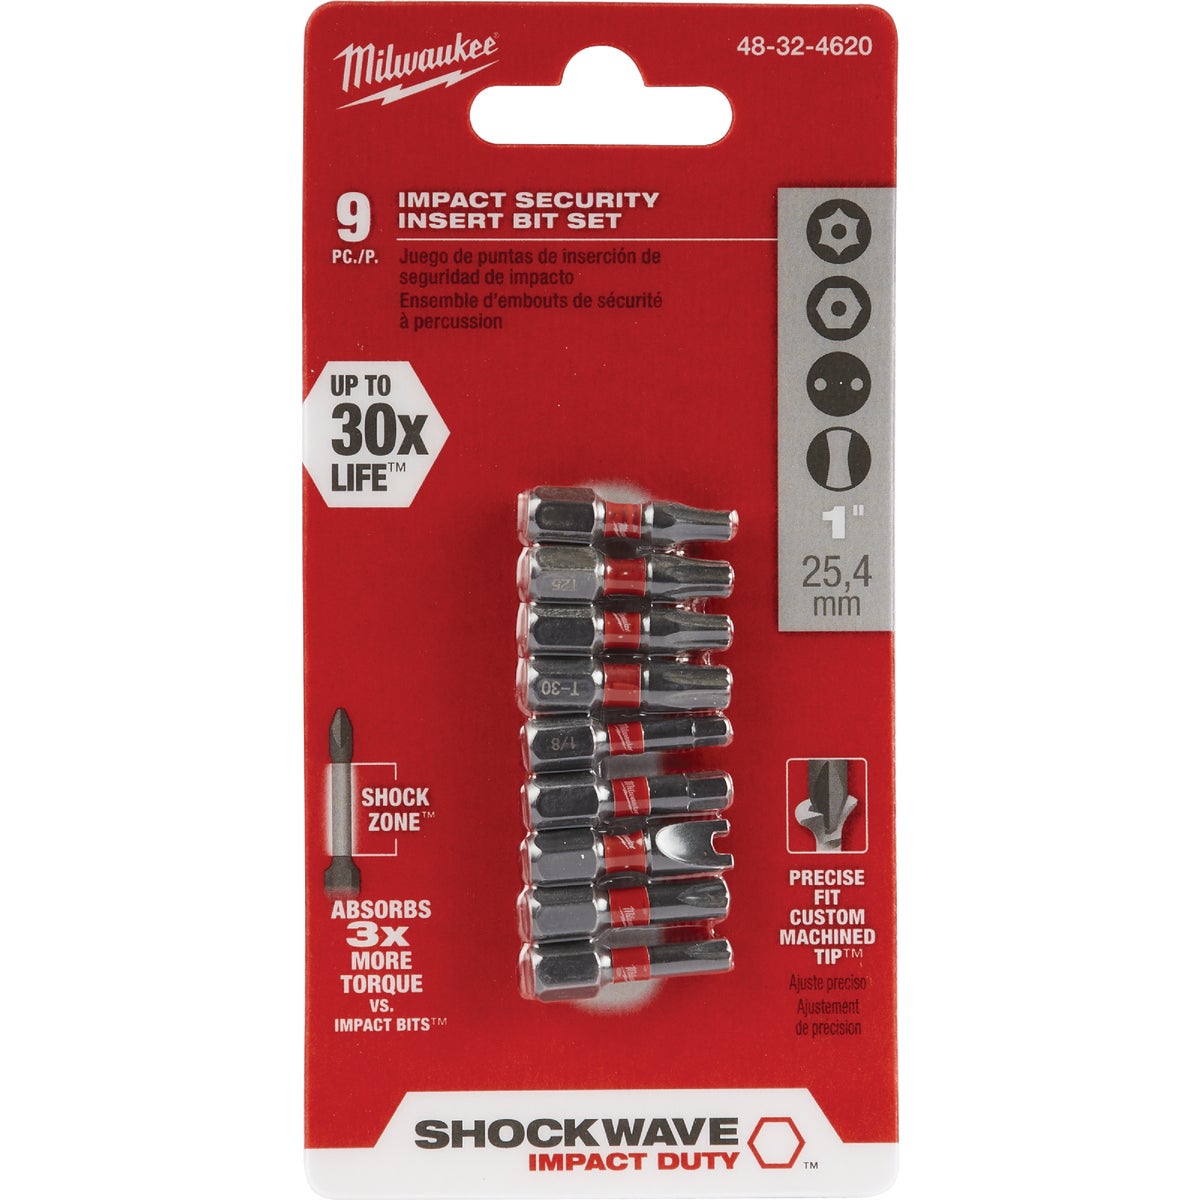 Item 303539, Shockwave Impact Duty driver bits can be used in impact drivers or drill 